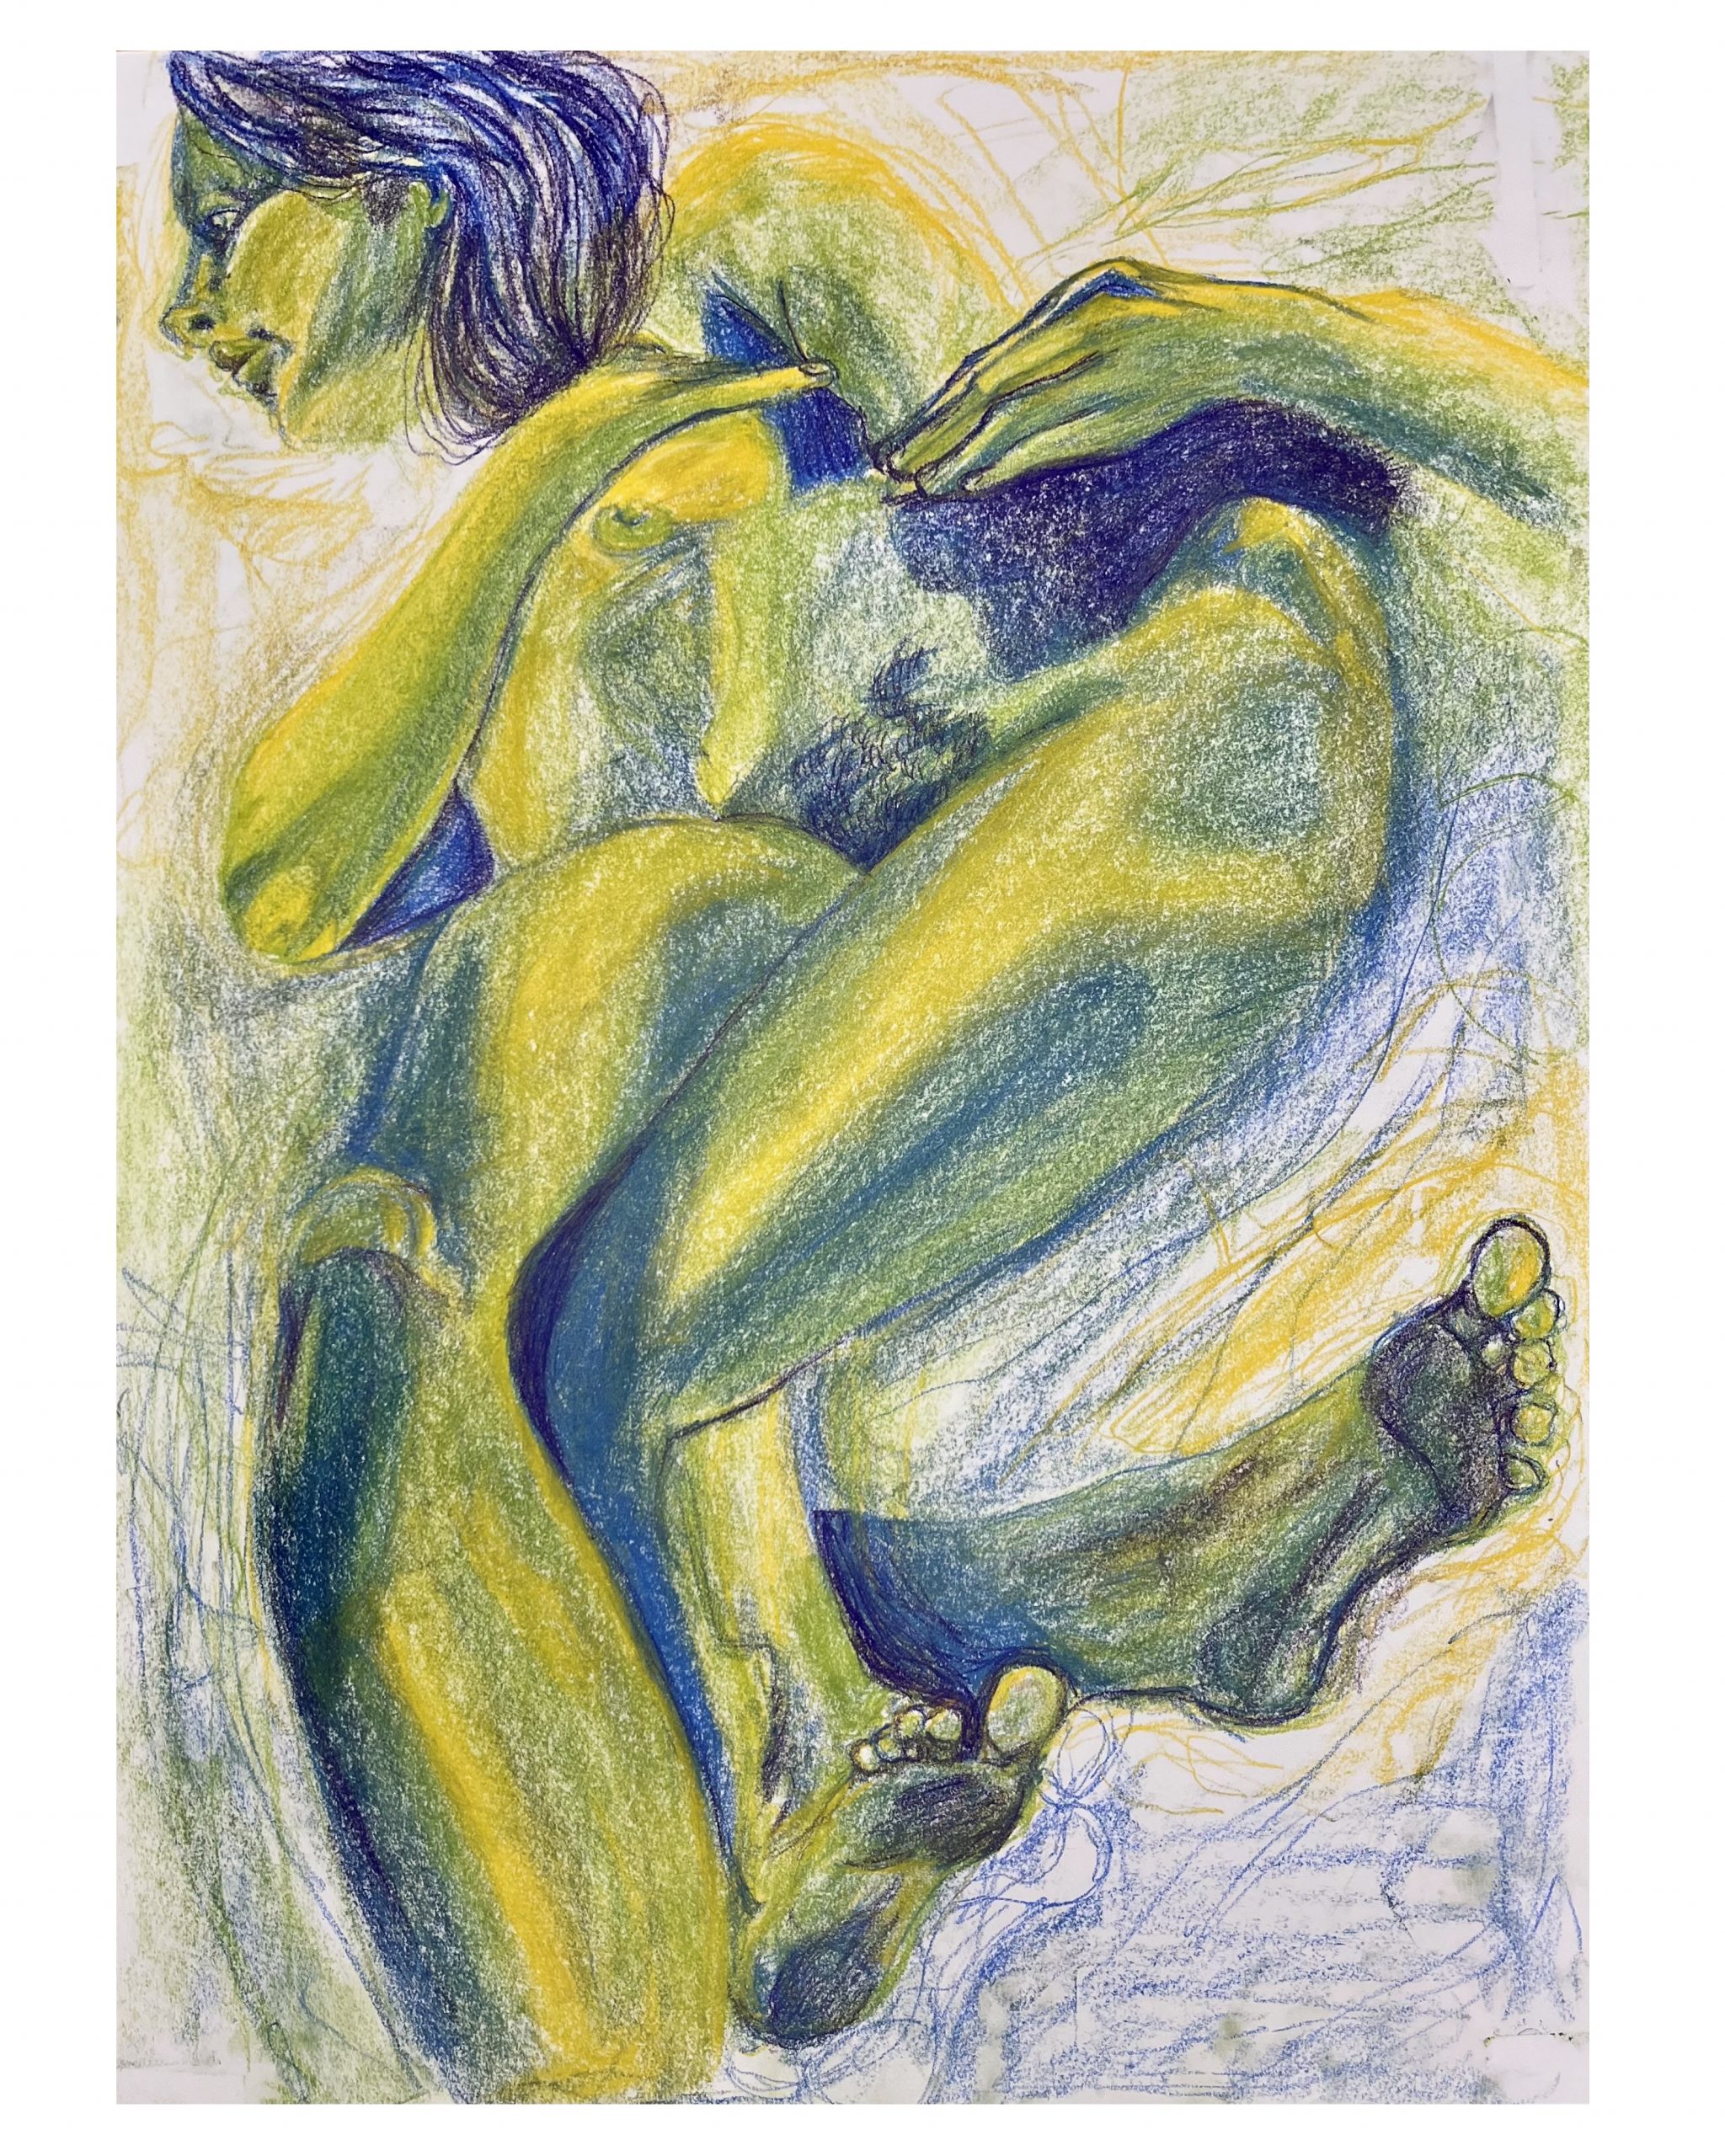 A figure study of a nude person rendered in green, yellow, and blue crayon. The figure's feet are towards the bottom of the page and appear closest to the viewer, with the figure appearing to be reclined backwards away from the viewer and towards the upper left corner. The shading is realistic, giving the figure a distinct volume, but the arrangement of the limbs is contorted. Combined with the vibrant color choices, the contorted limbs give the overall image a surreal quality.